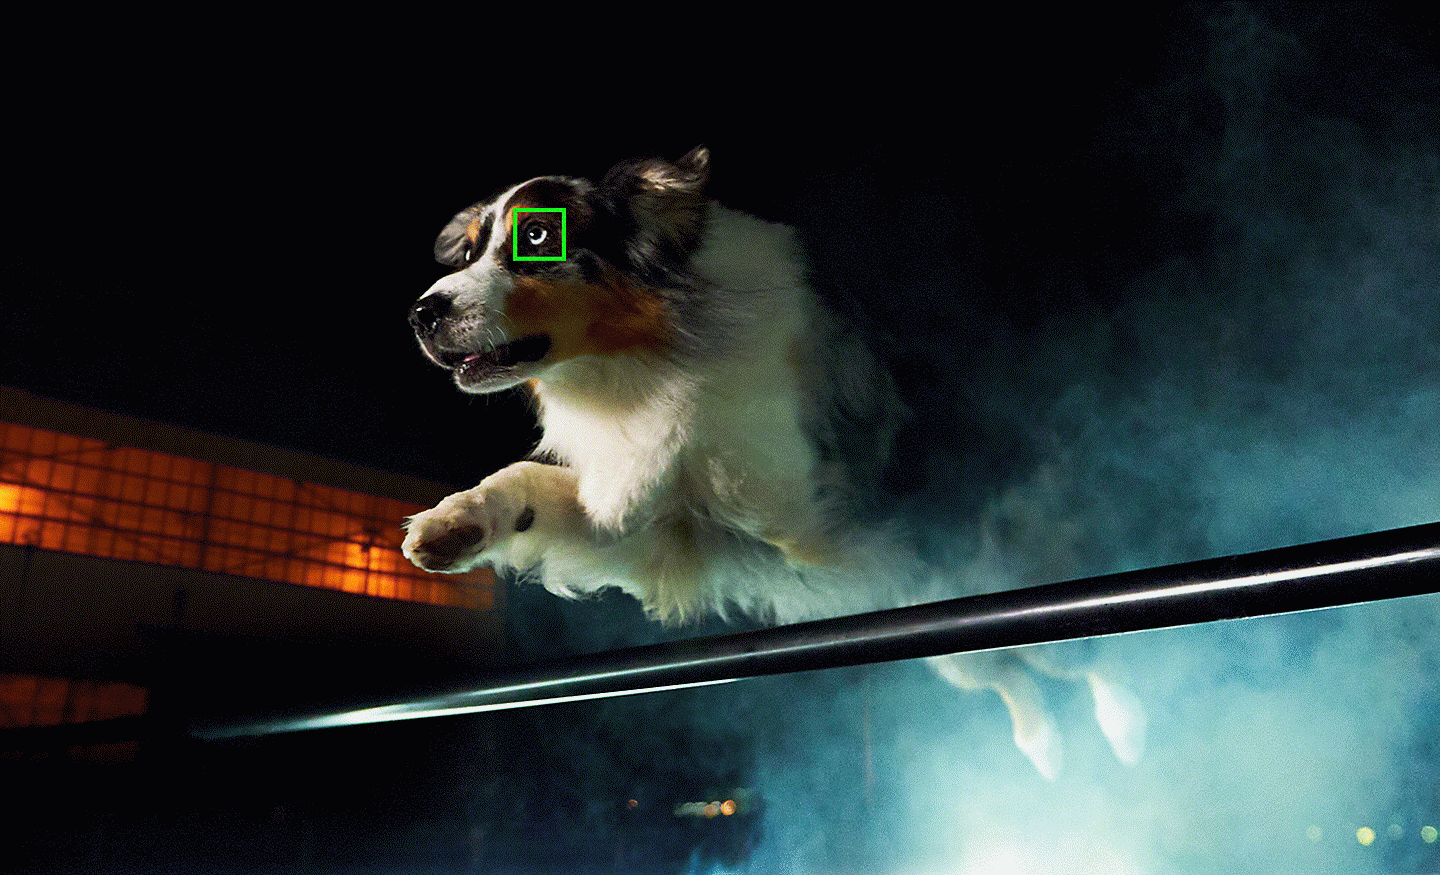 Low-light photo of dog leaping with a green AF point over its eye